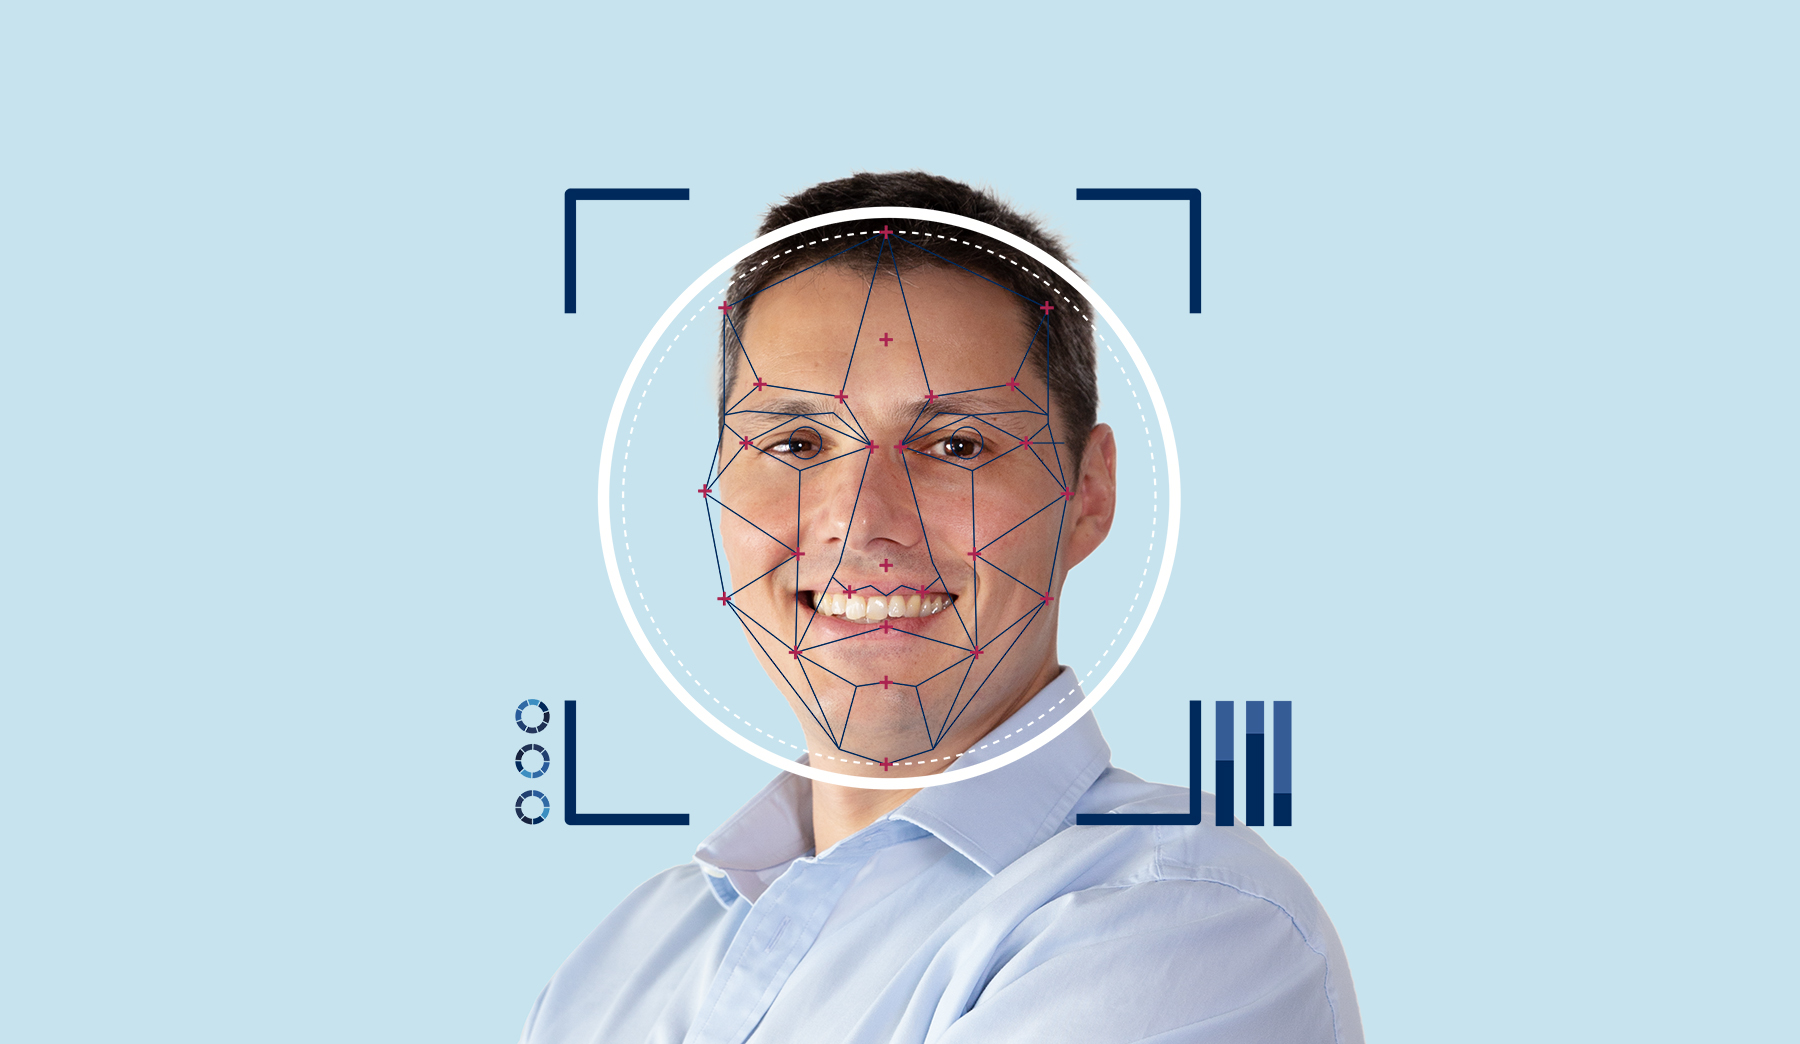 uses of face recognition systems